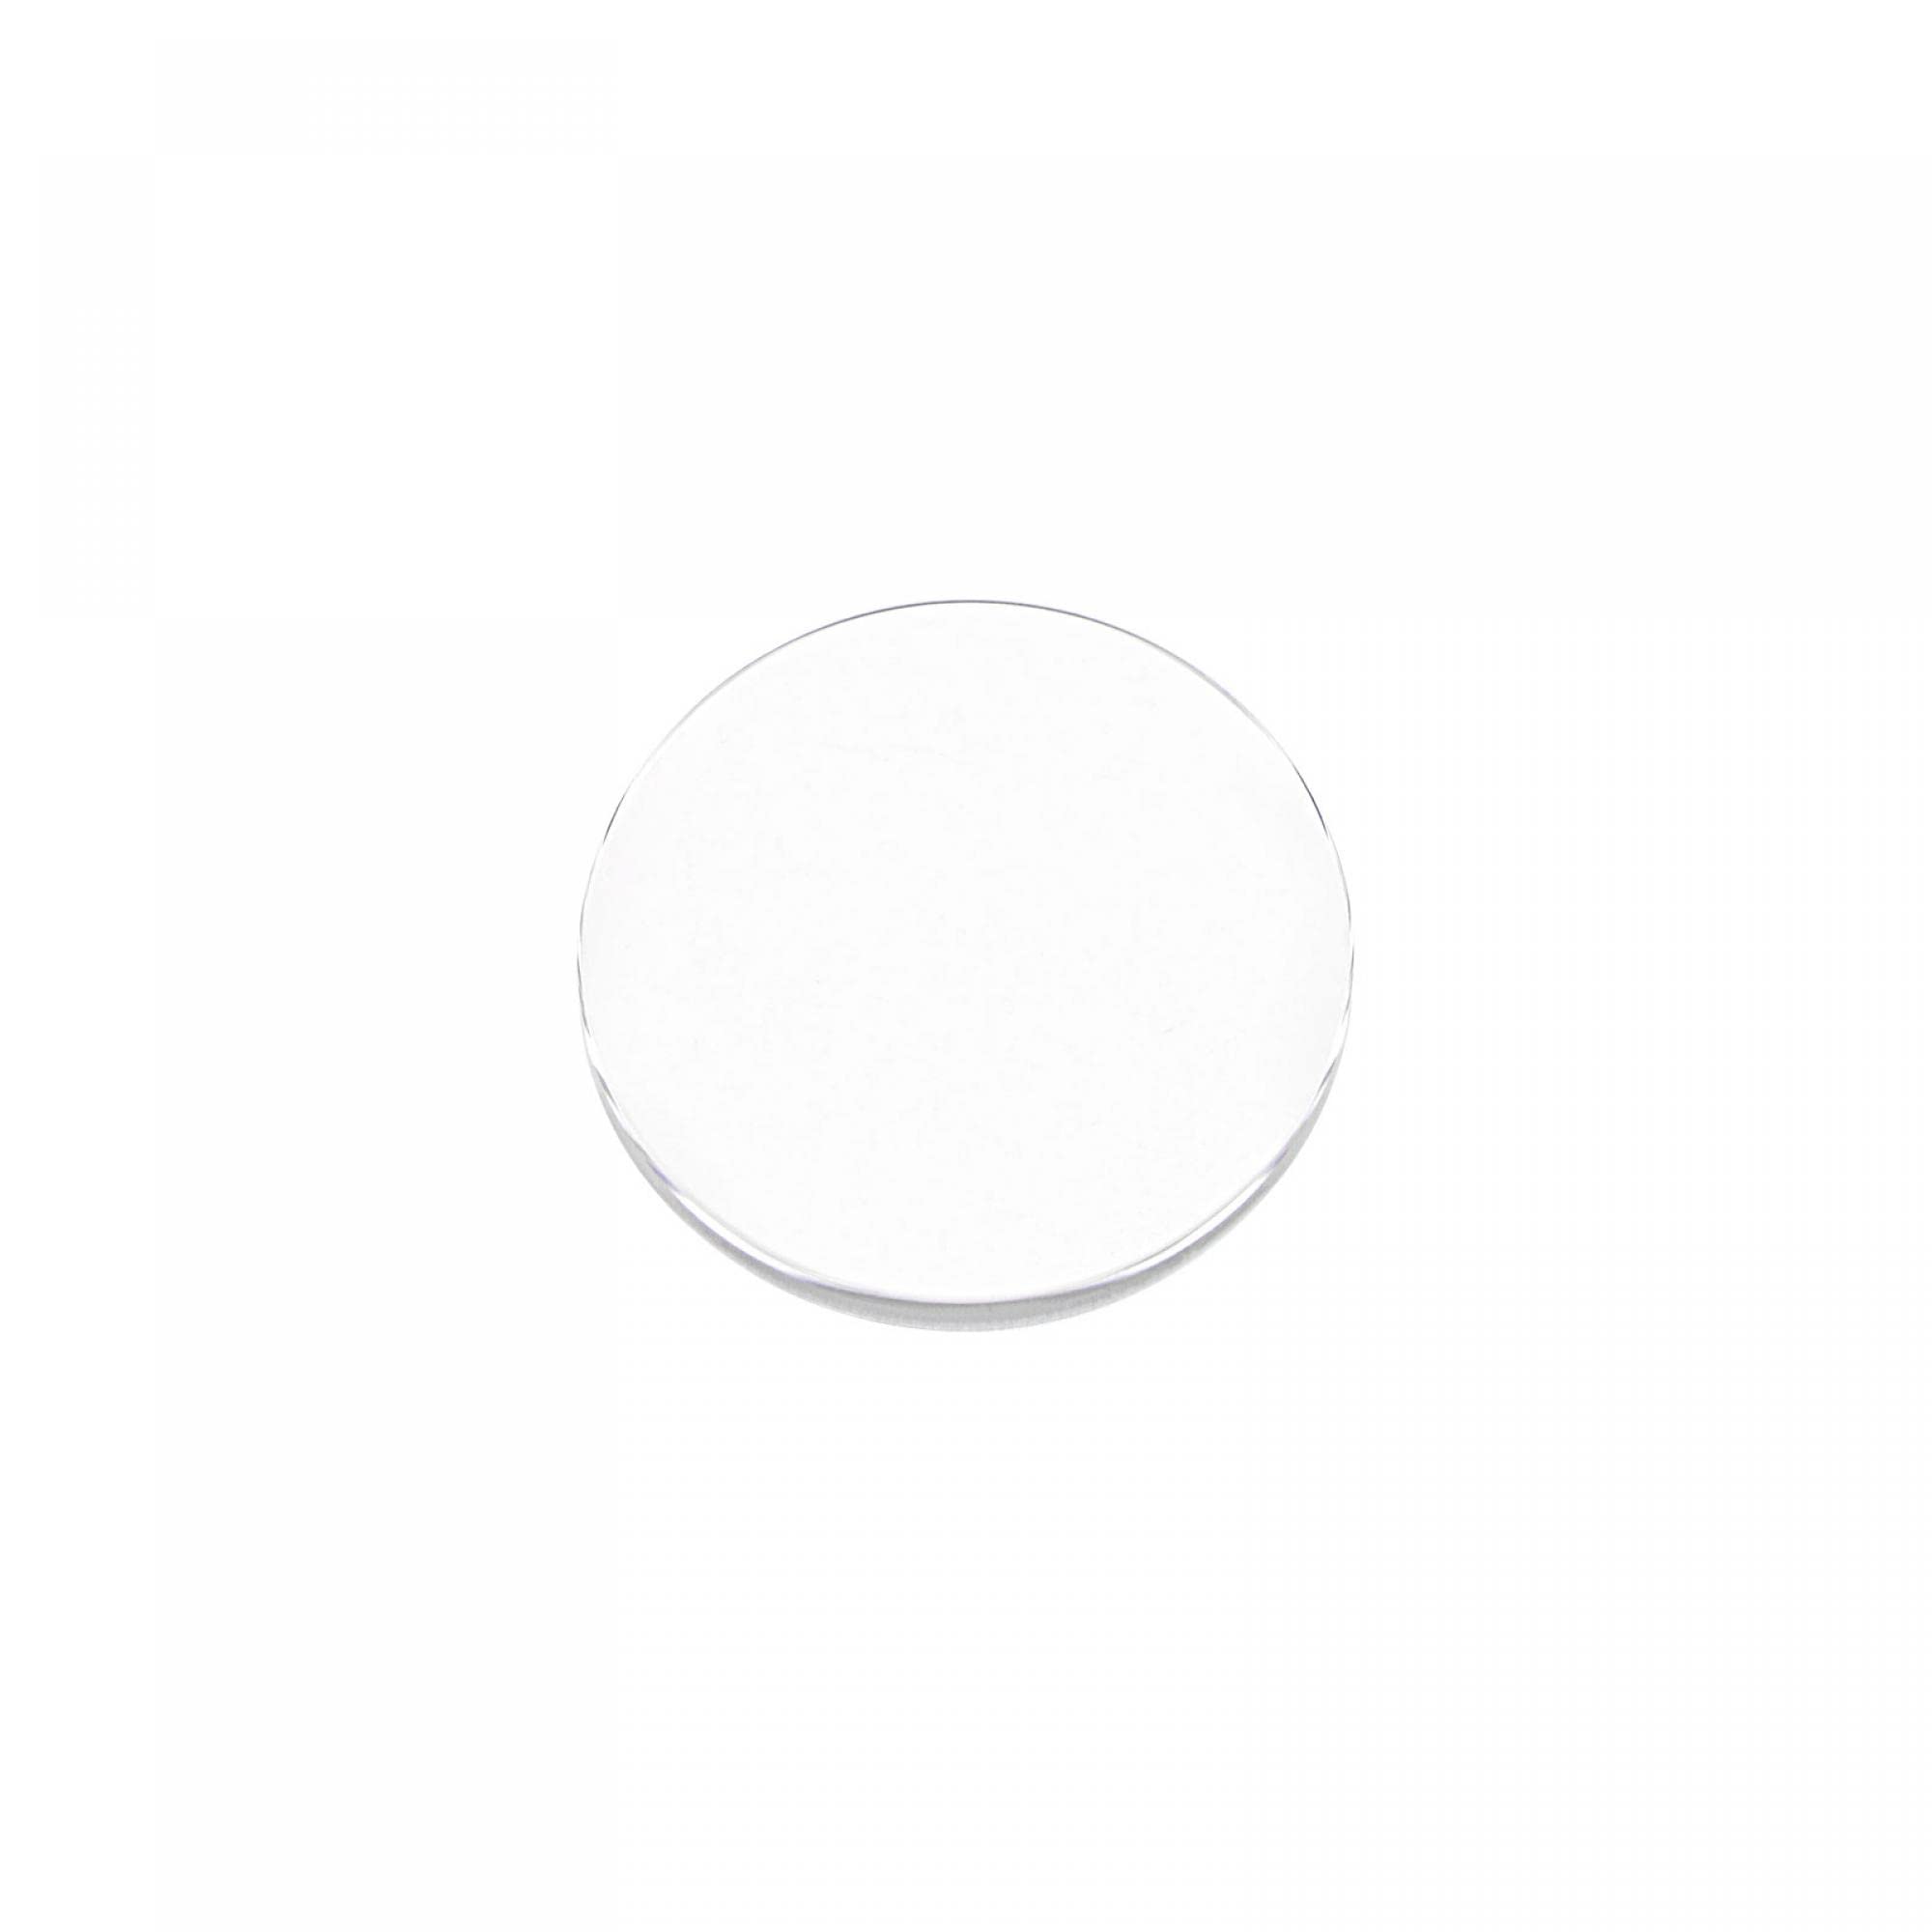 uxcell 20mm Dia. Watch Glass Sapphire Crystal Lens, Round Flat 1mm Thickness Replacement Parts for Watchmaker Repair Clear